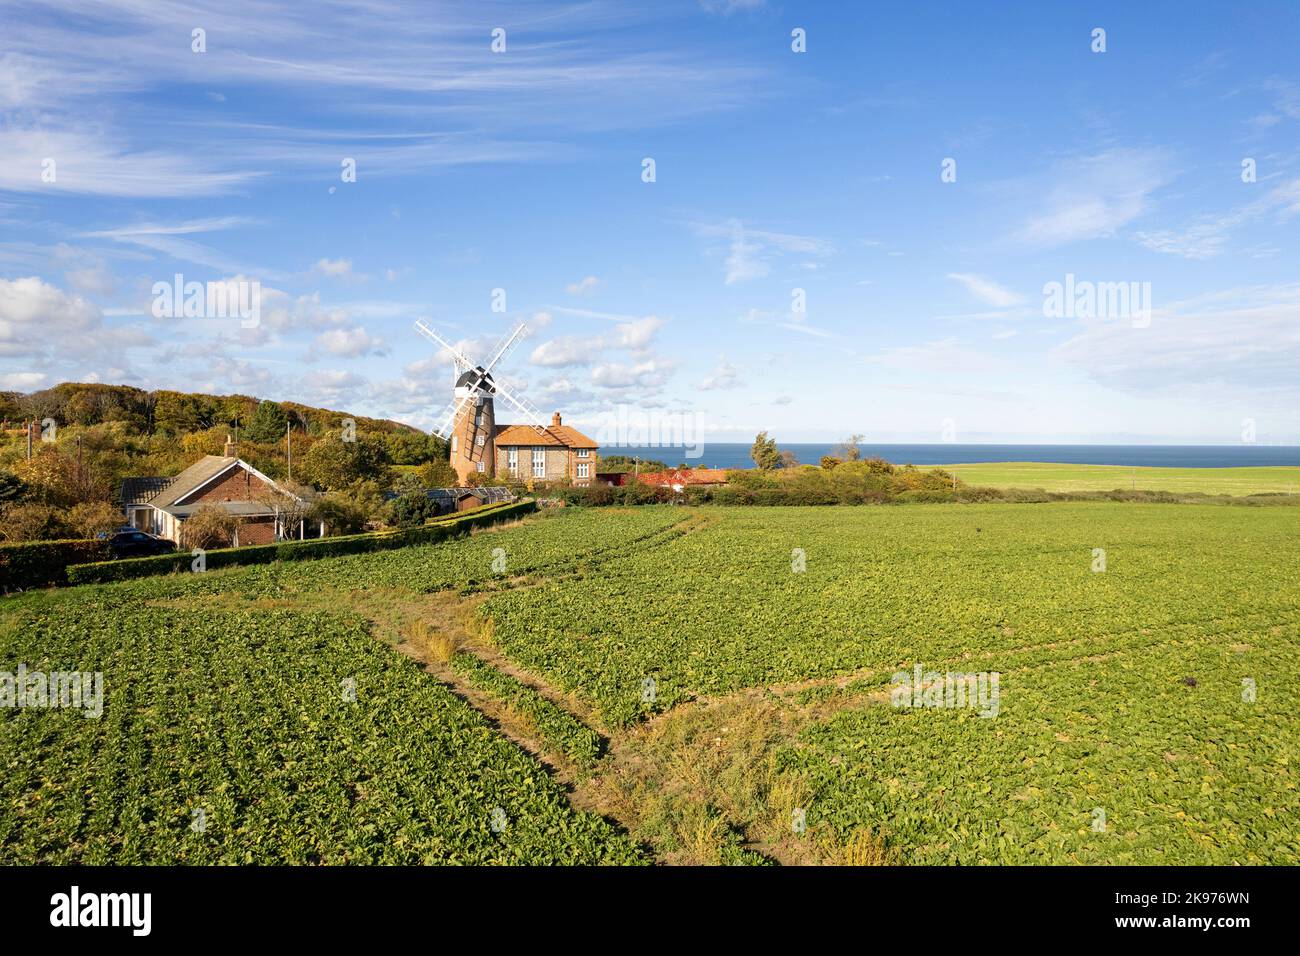 The windmill at Weybourne in north Norfolk, UK Stock Photo